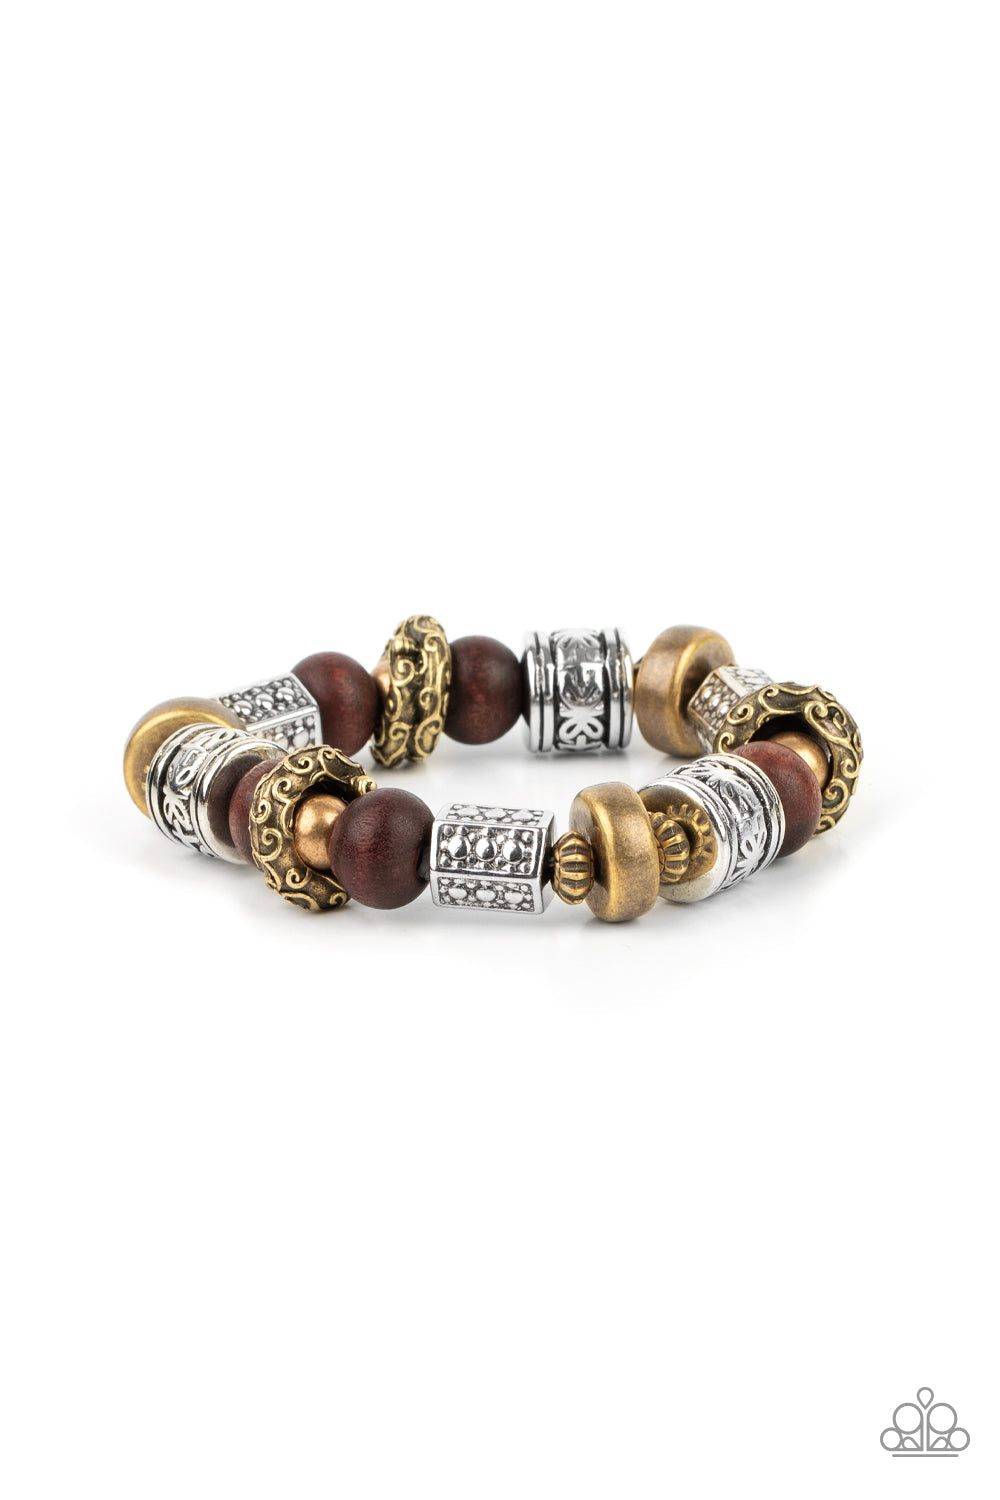 Exploring The Elements - Brass - Silver - Wood Beads - Stretchy Bracelet Multi Metal Bracelets Bejeweled Accessories By Kristie Featuring Paparazzi Jewelry - Trendy fashion jewelry for everyone -